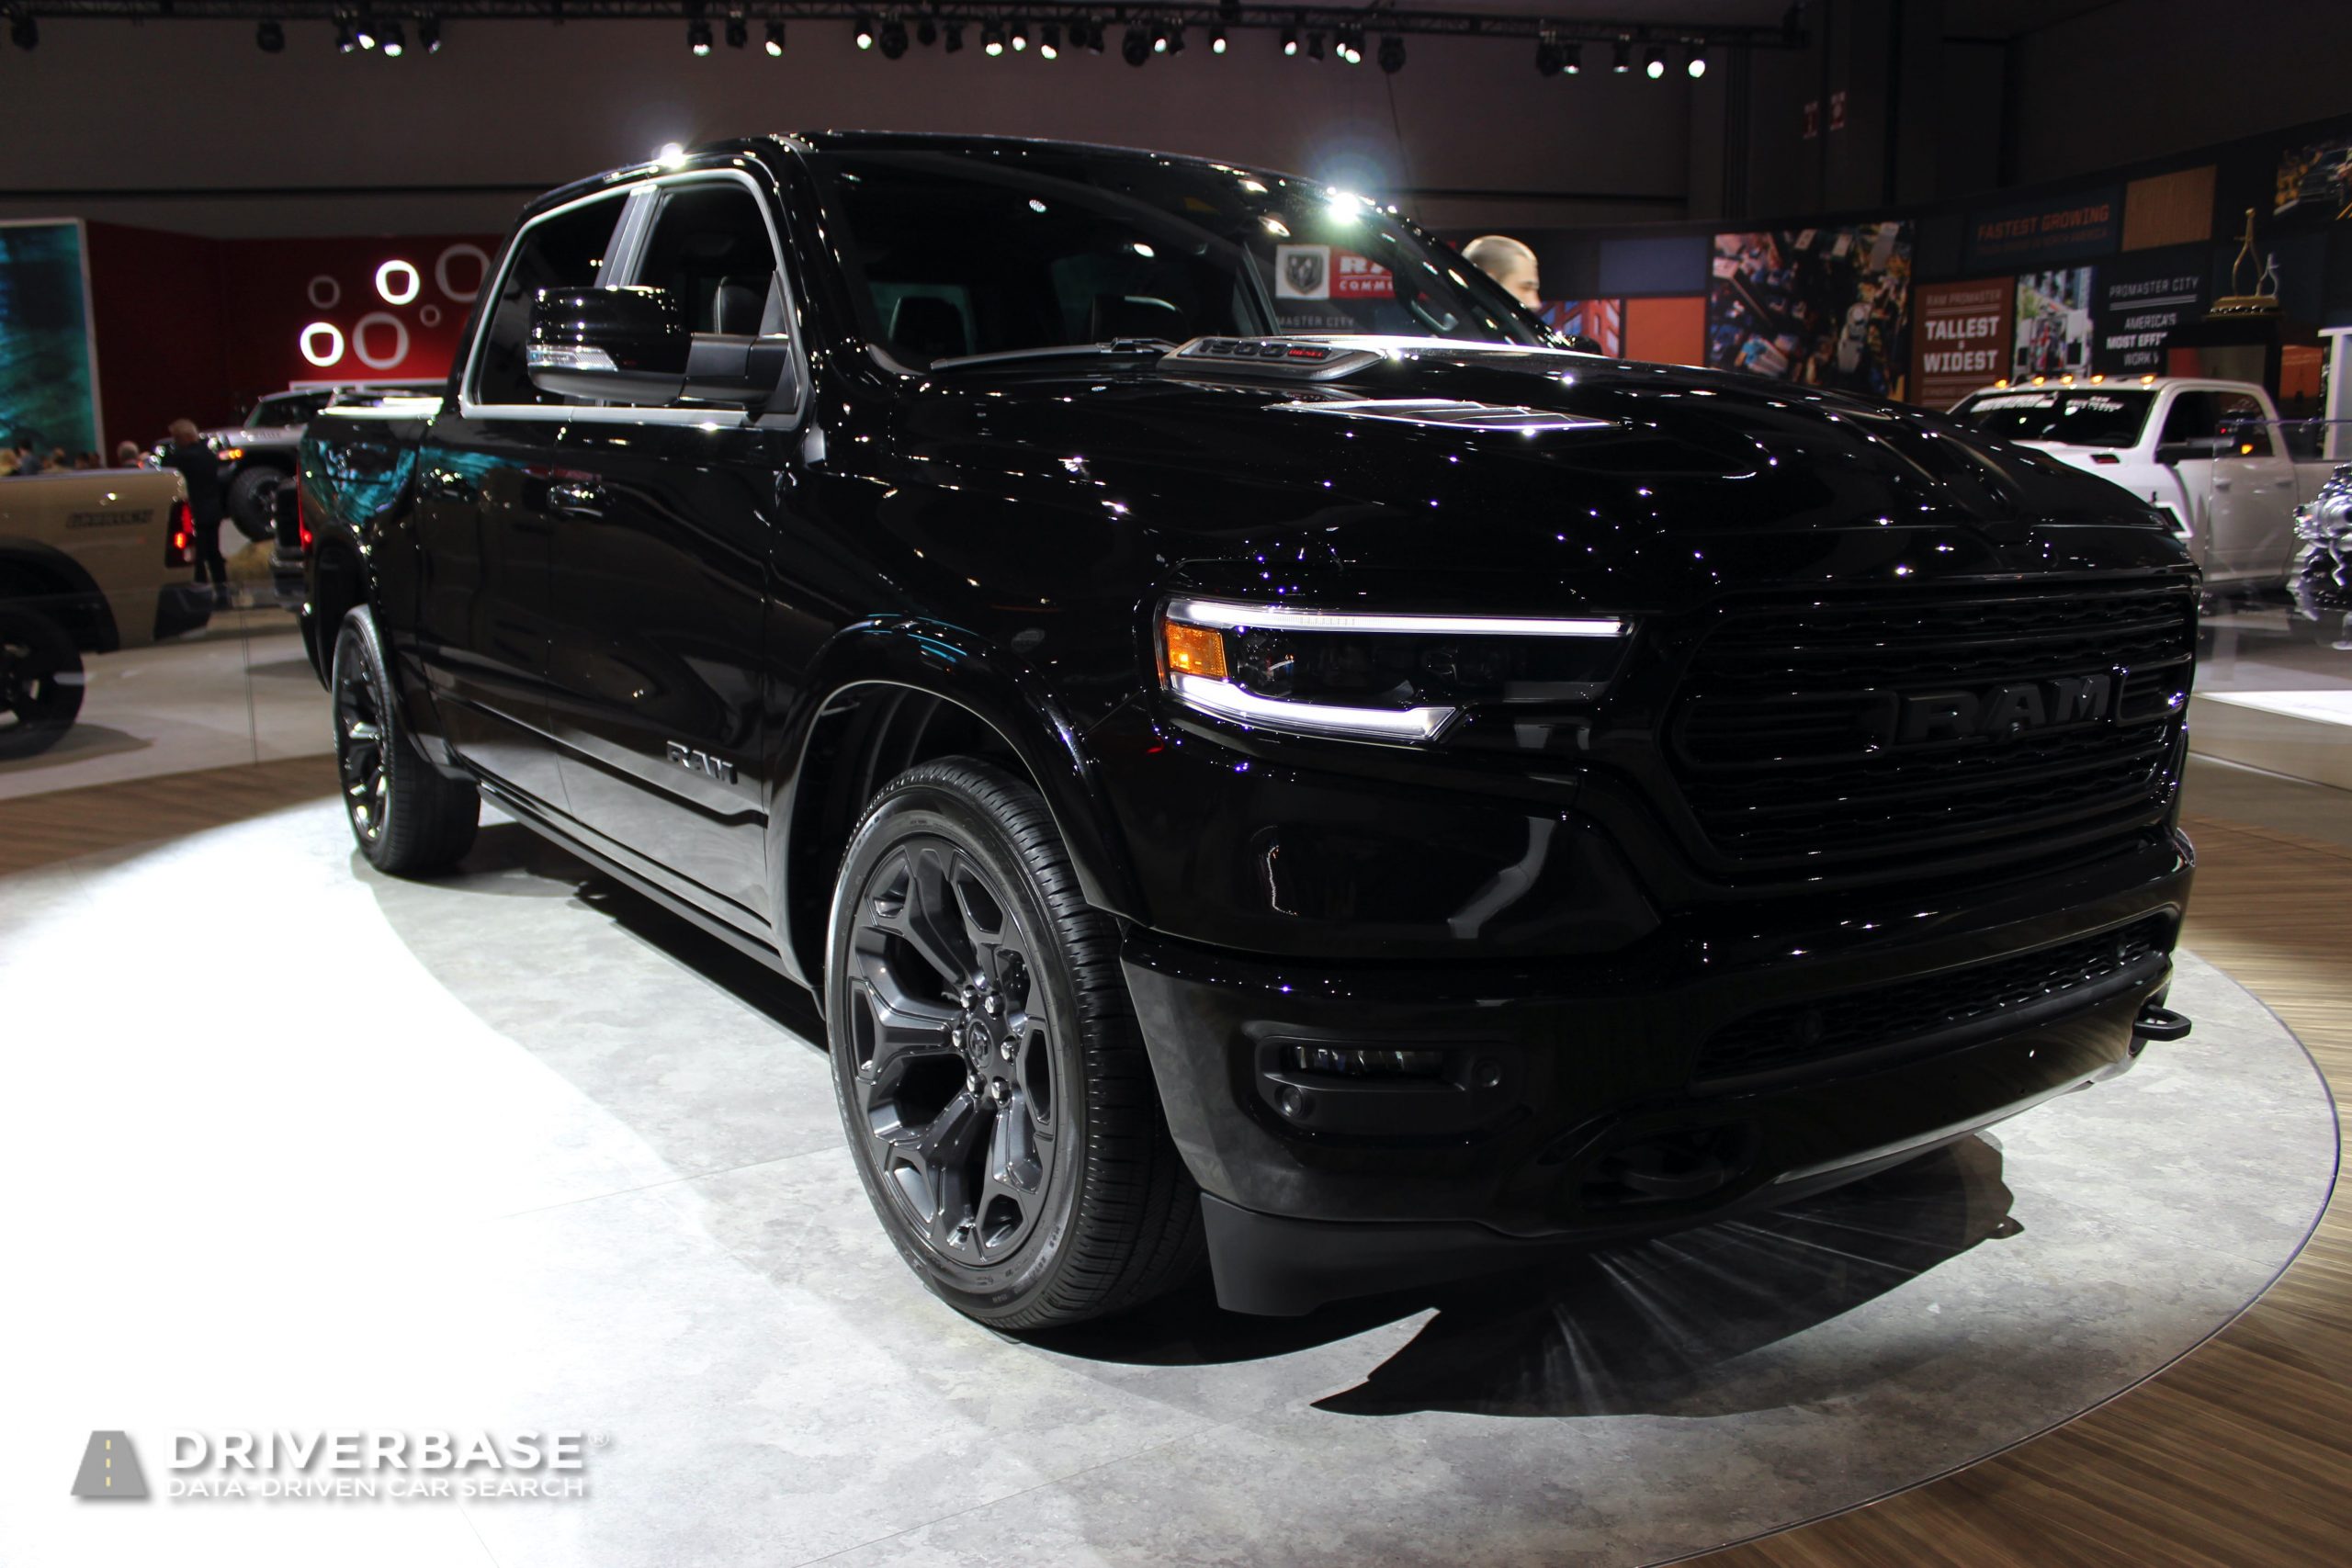 2020 Ram 1500 Limited at the 2019 Los Angeles Auto Show